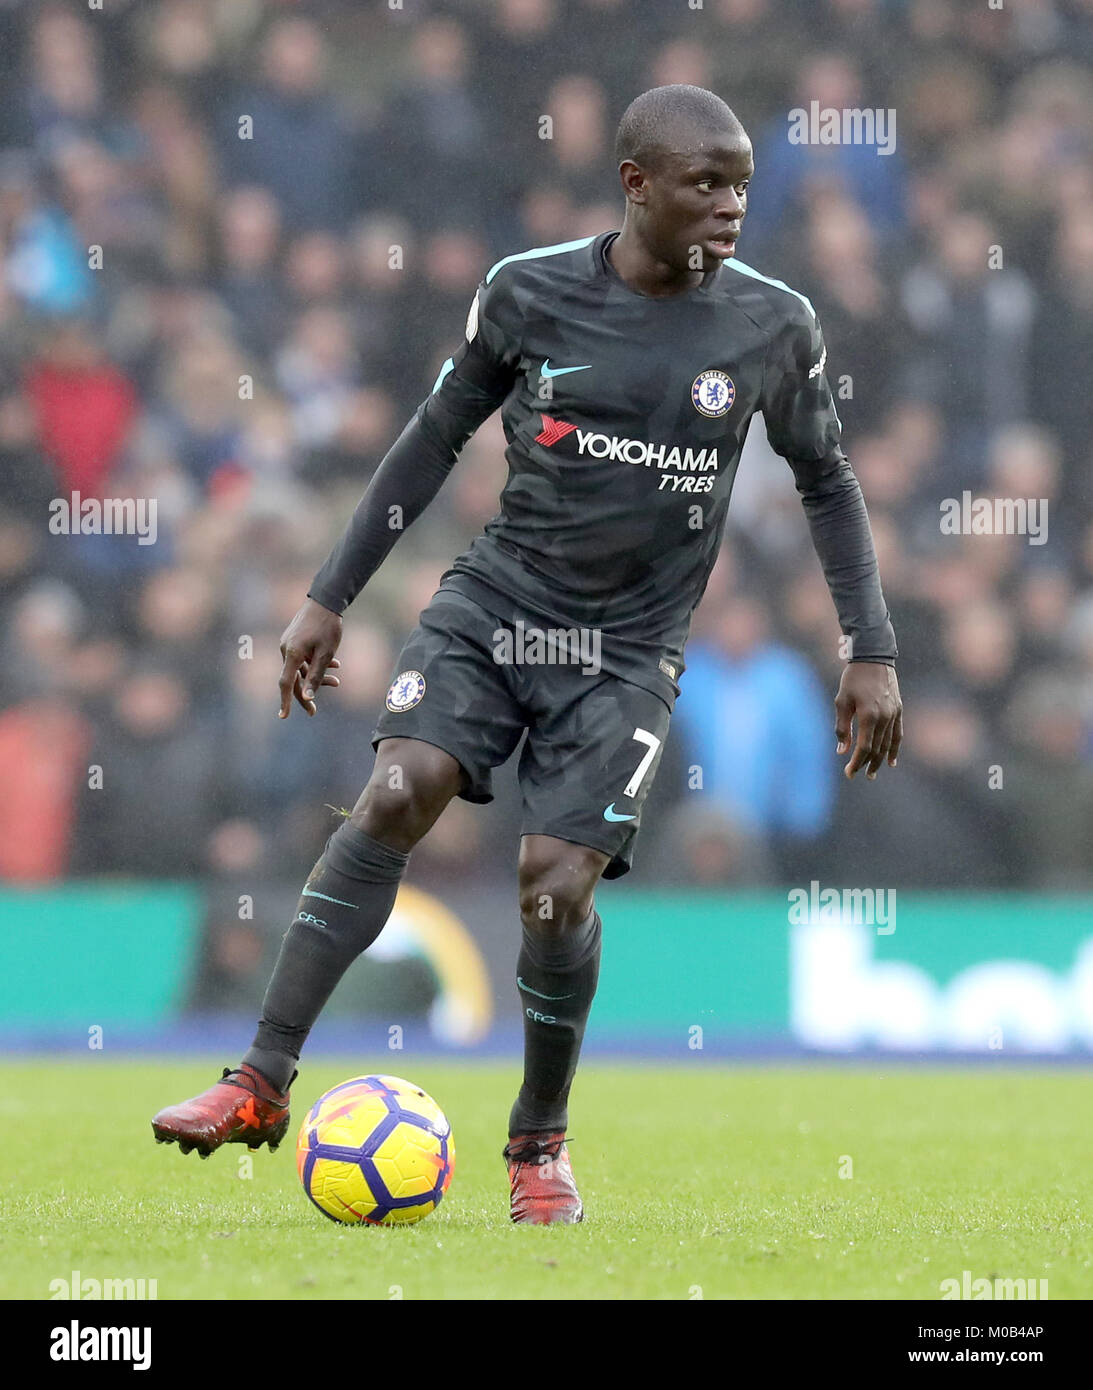 Chelsea's N'Golo Kante during the Premier League match at the AMEX Stadium, Brighton. PRESS ASSOCIATION Photo. Picture date: Saturday January 20, 2018. See PA story SOCCER Brighton. Photo credit should read: Gareth Fuller/PA Wire. RESTRICTIONS: No use with unauthorised audio, video, data, fixture lists, club/league logos or 'live' services. Online in-match use limited to 75 images, no video emulation. No use in betting, games or single club/league/player publications. Stock Photo